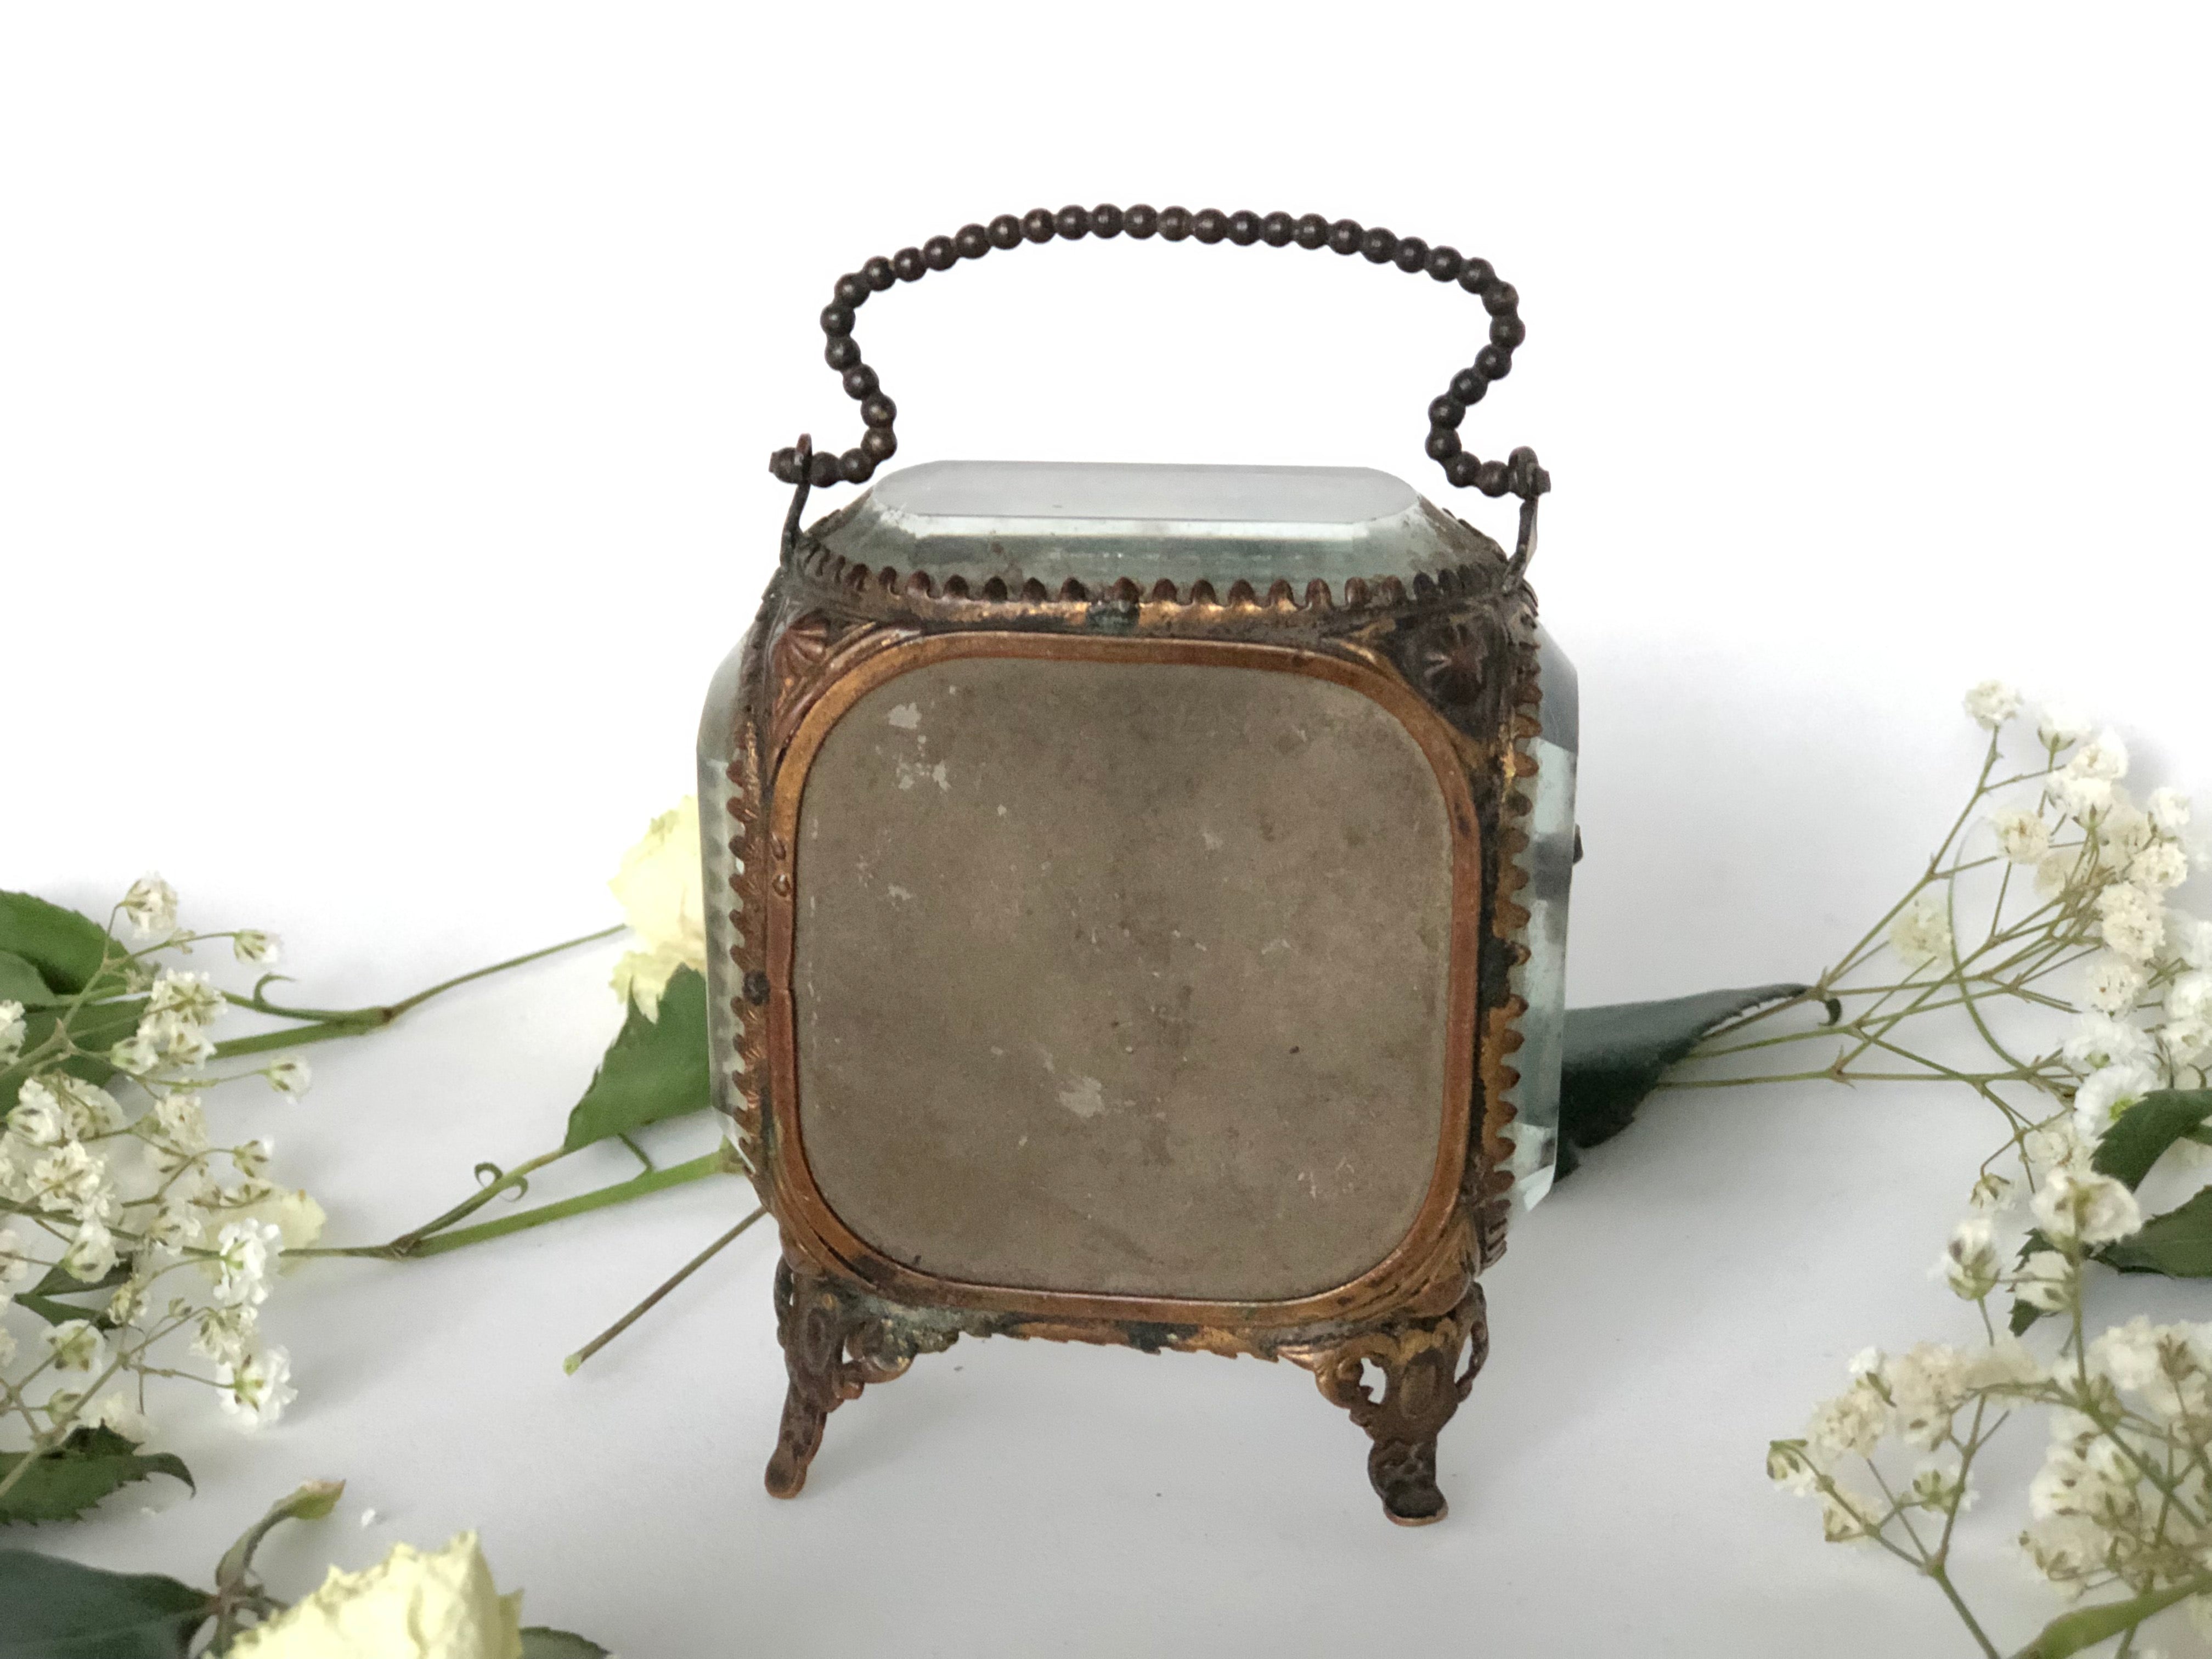 Antique French Victorian Watch display case